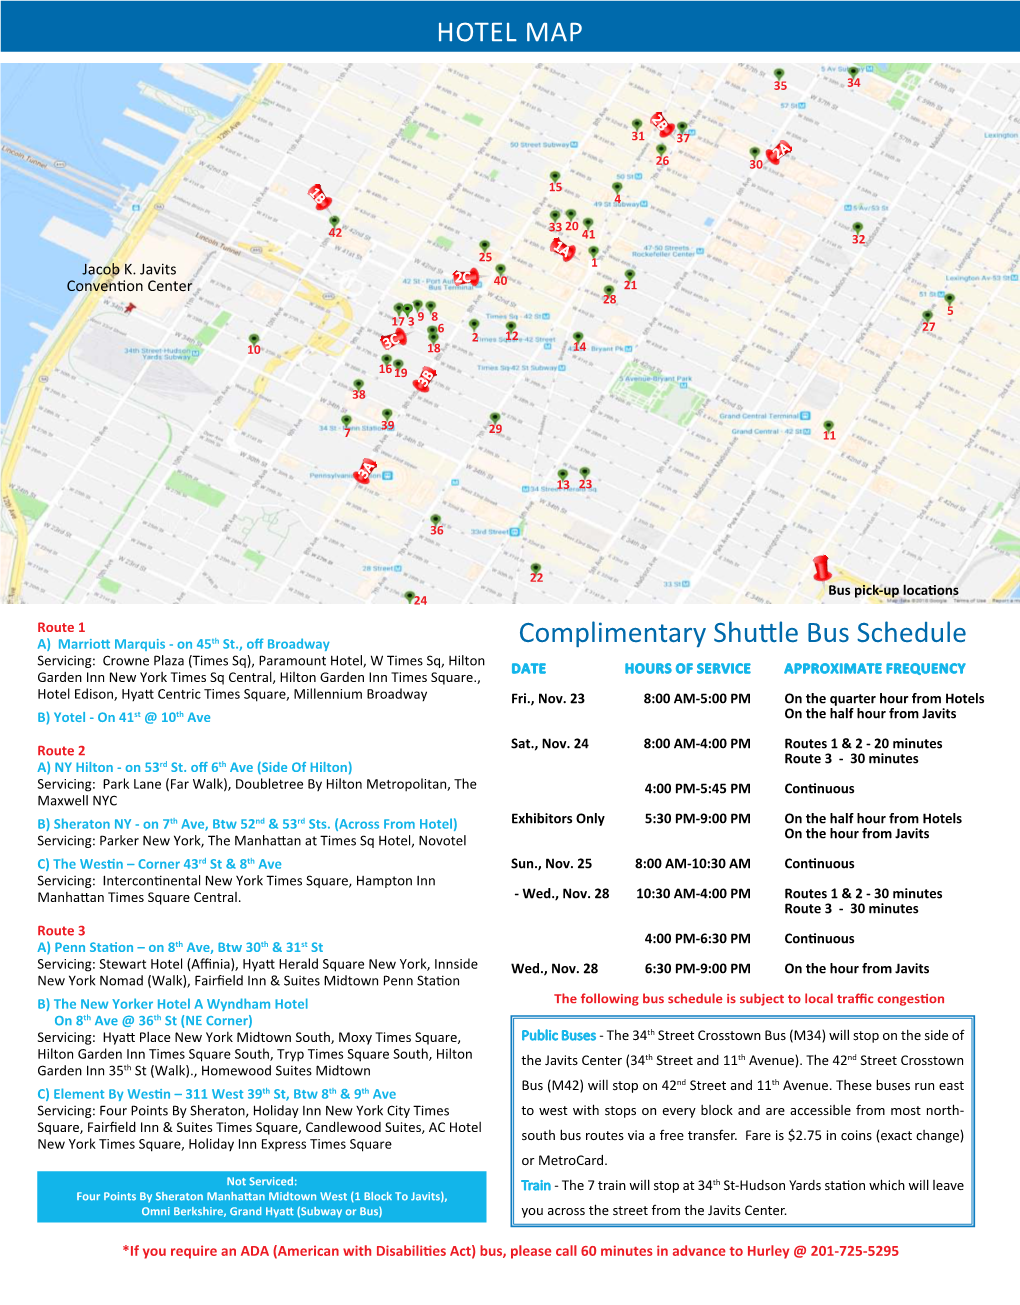 Complimentary Shuttle Bus Schedule